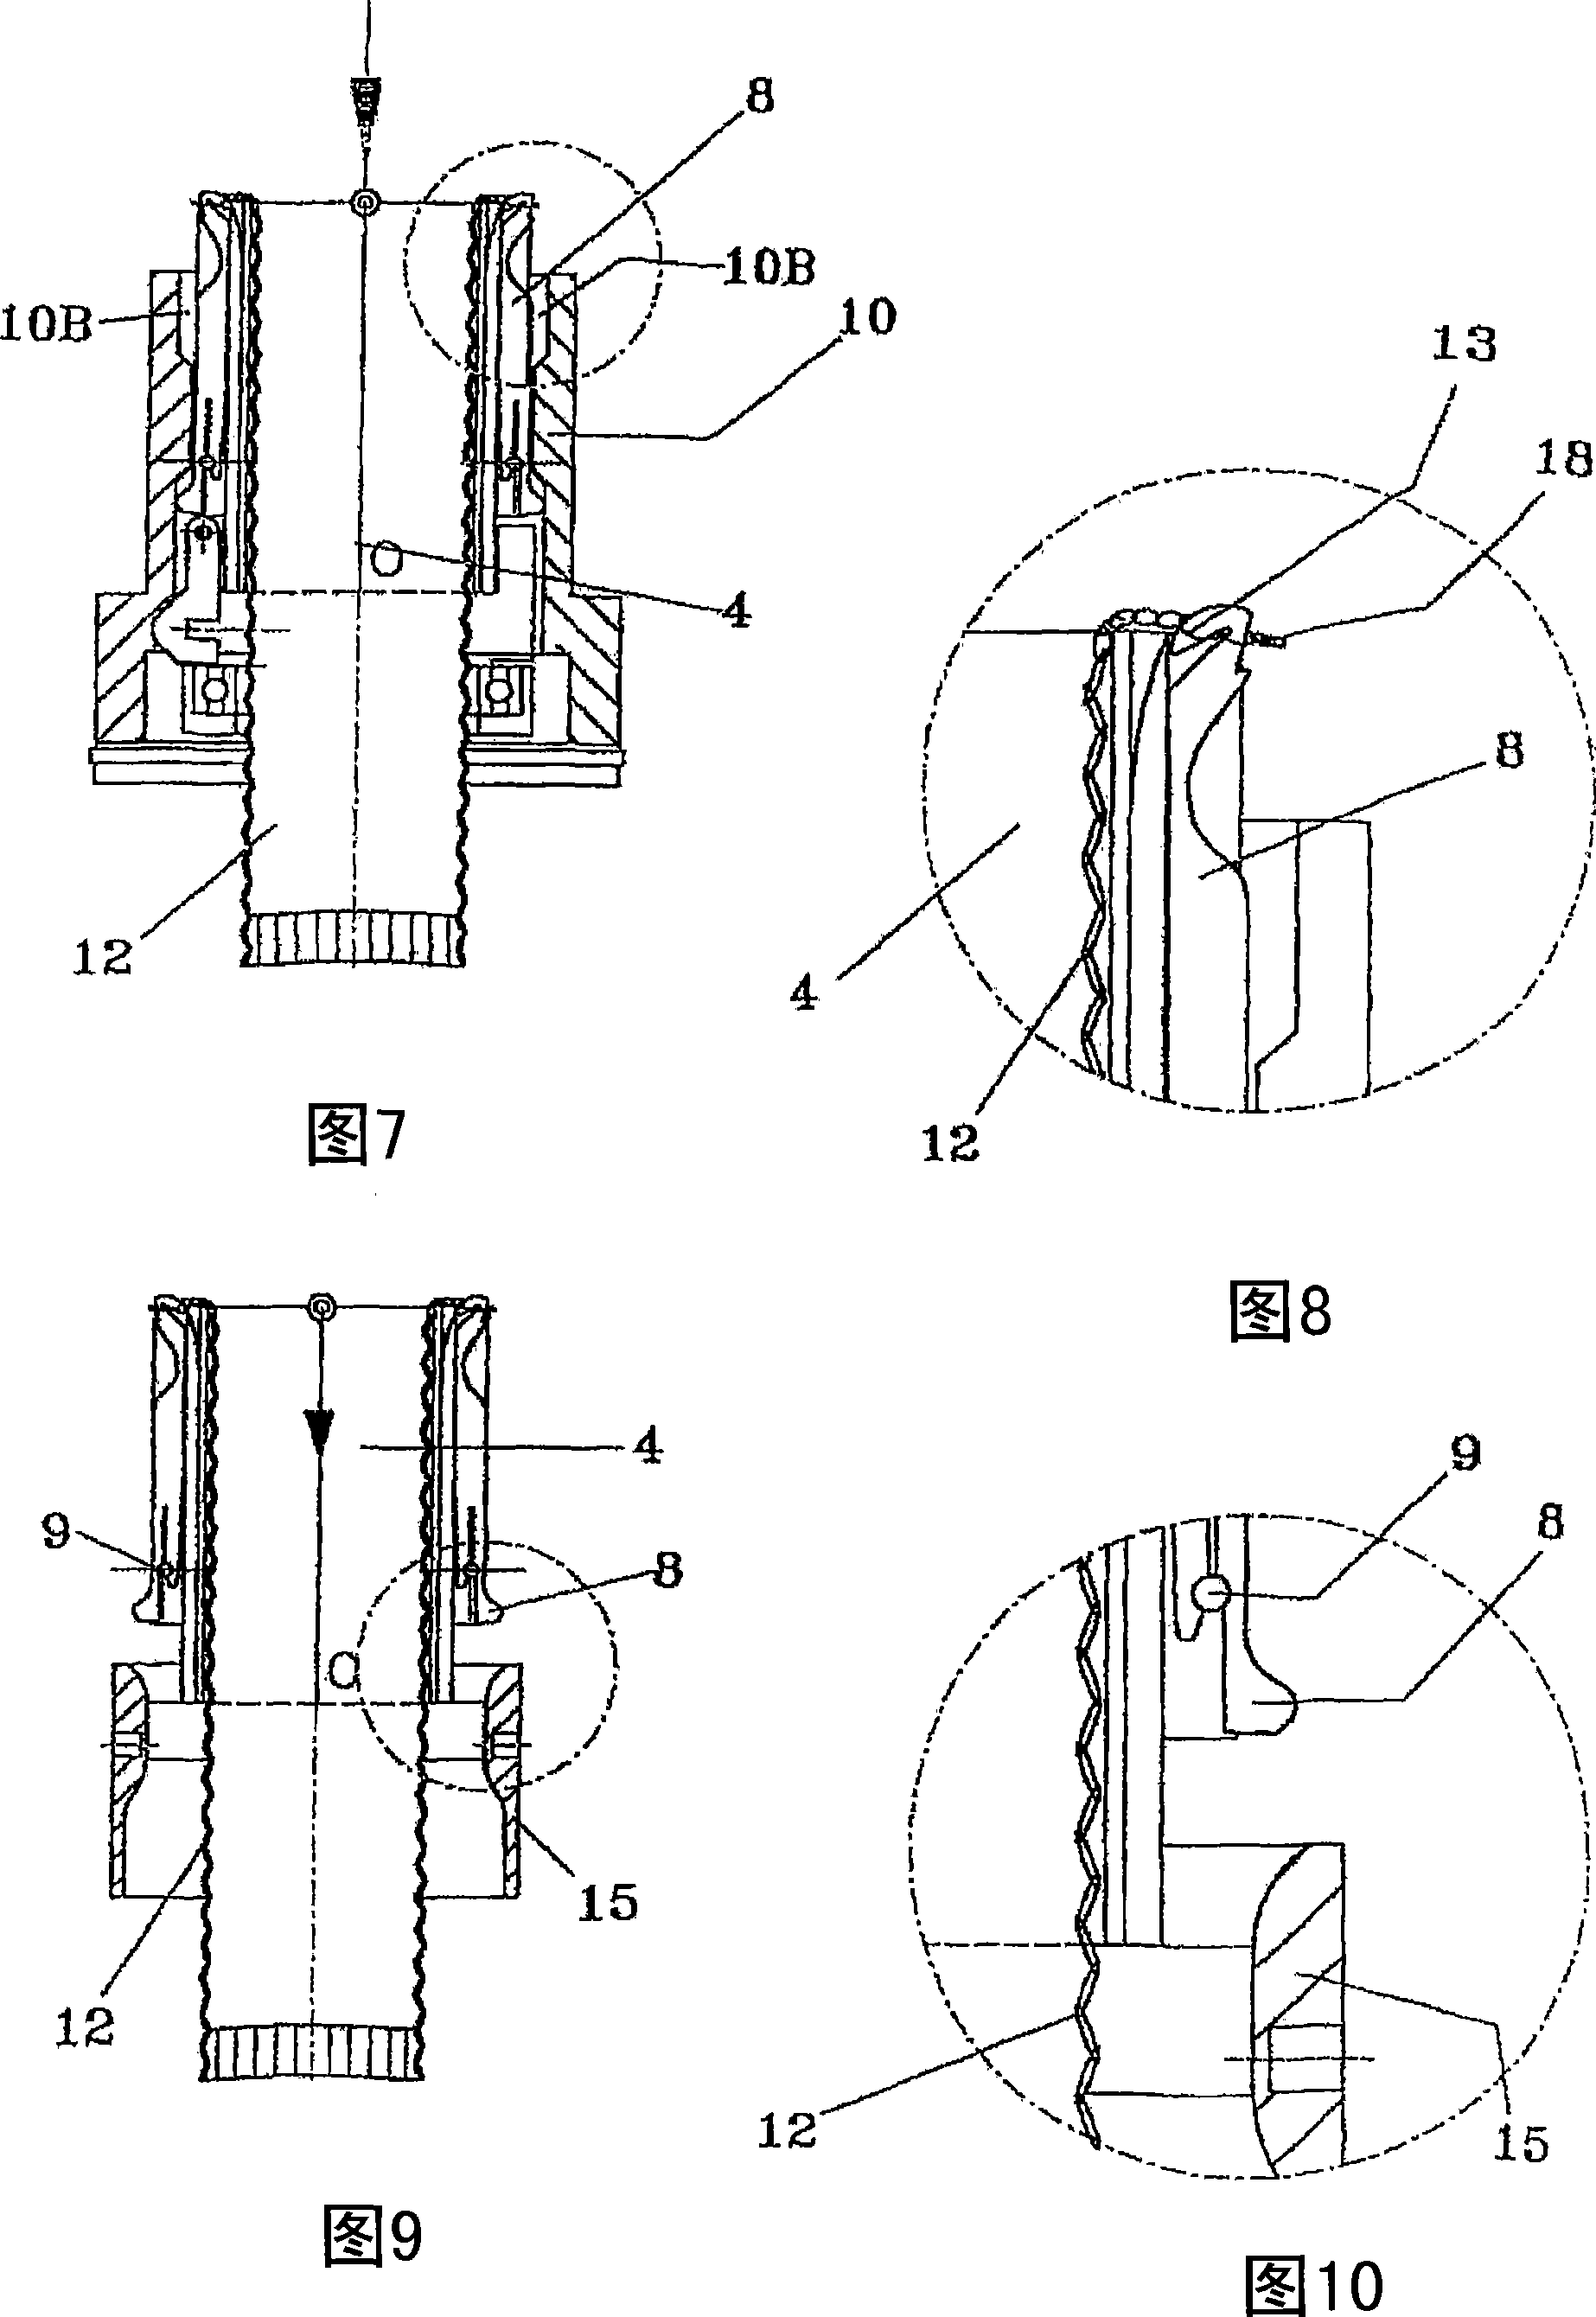 Integrated system for the close-down of the stocking on circular machines for tubular semifinished production in stitch and the device relative to it